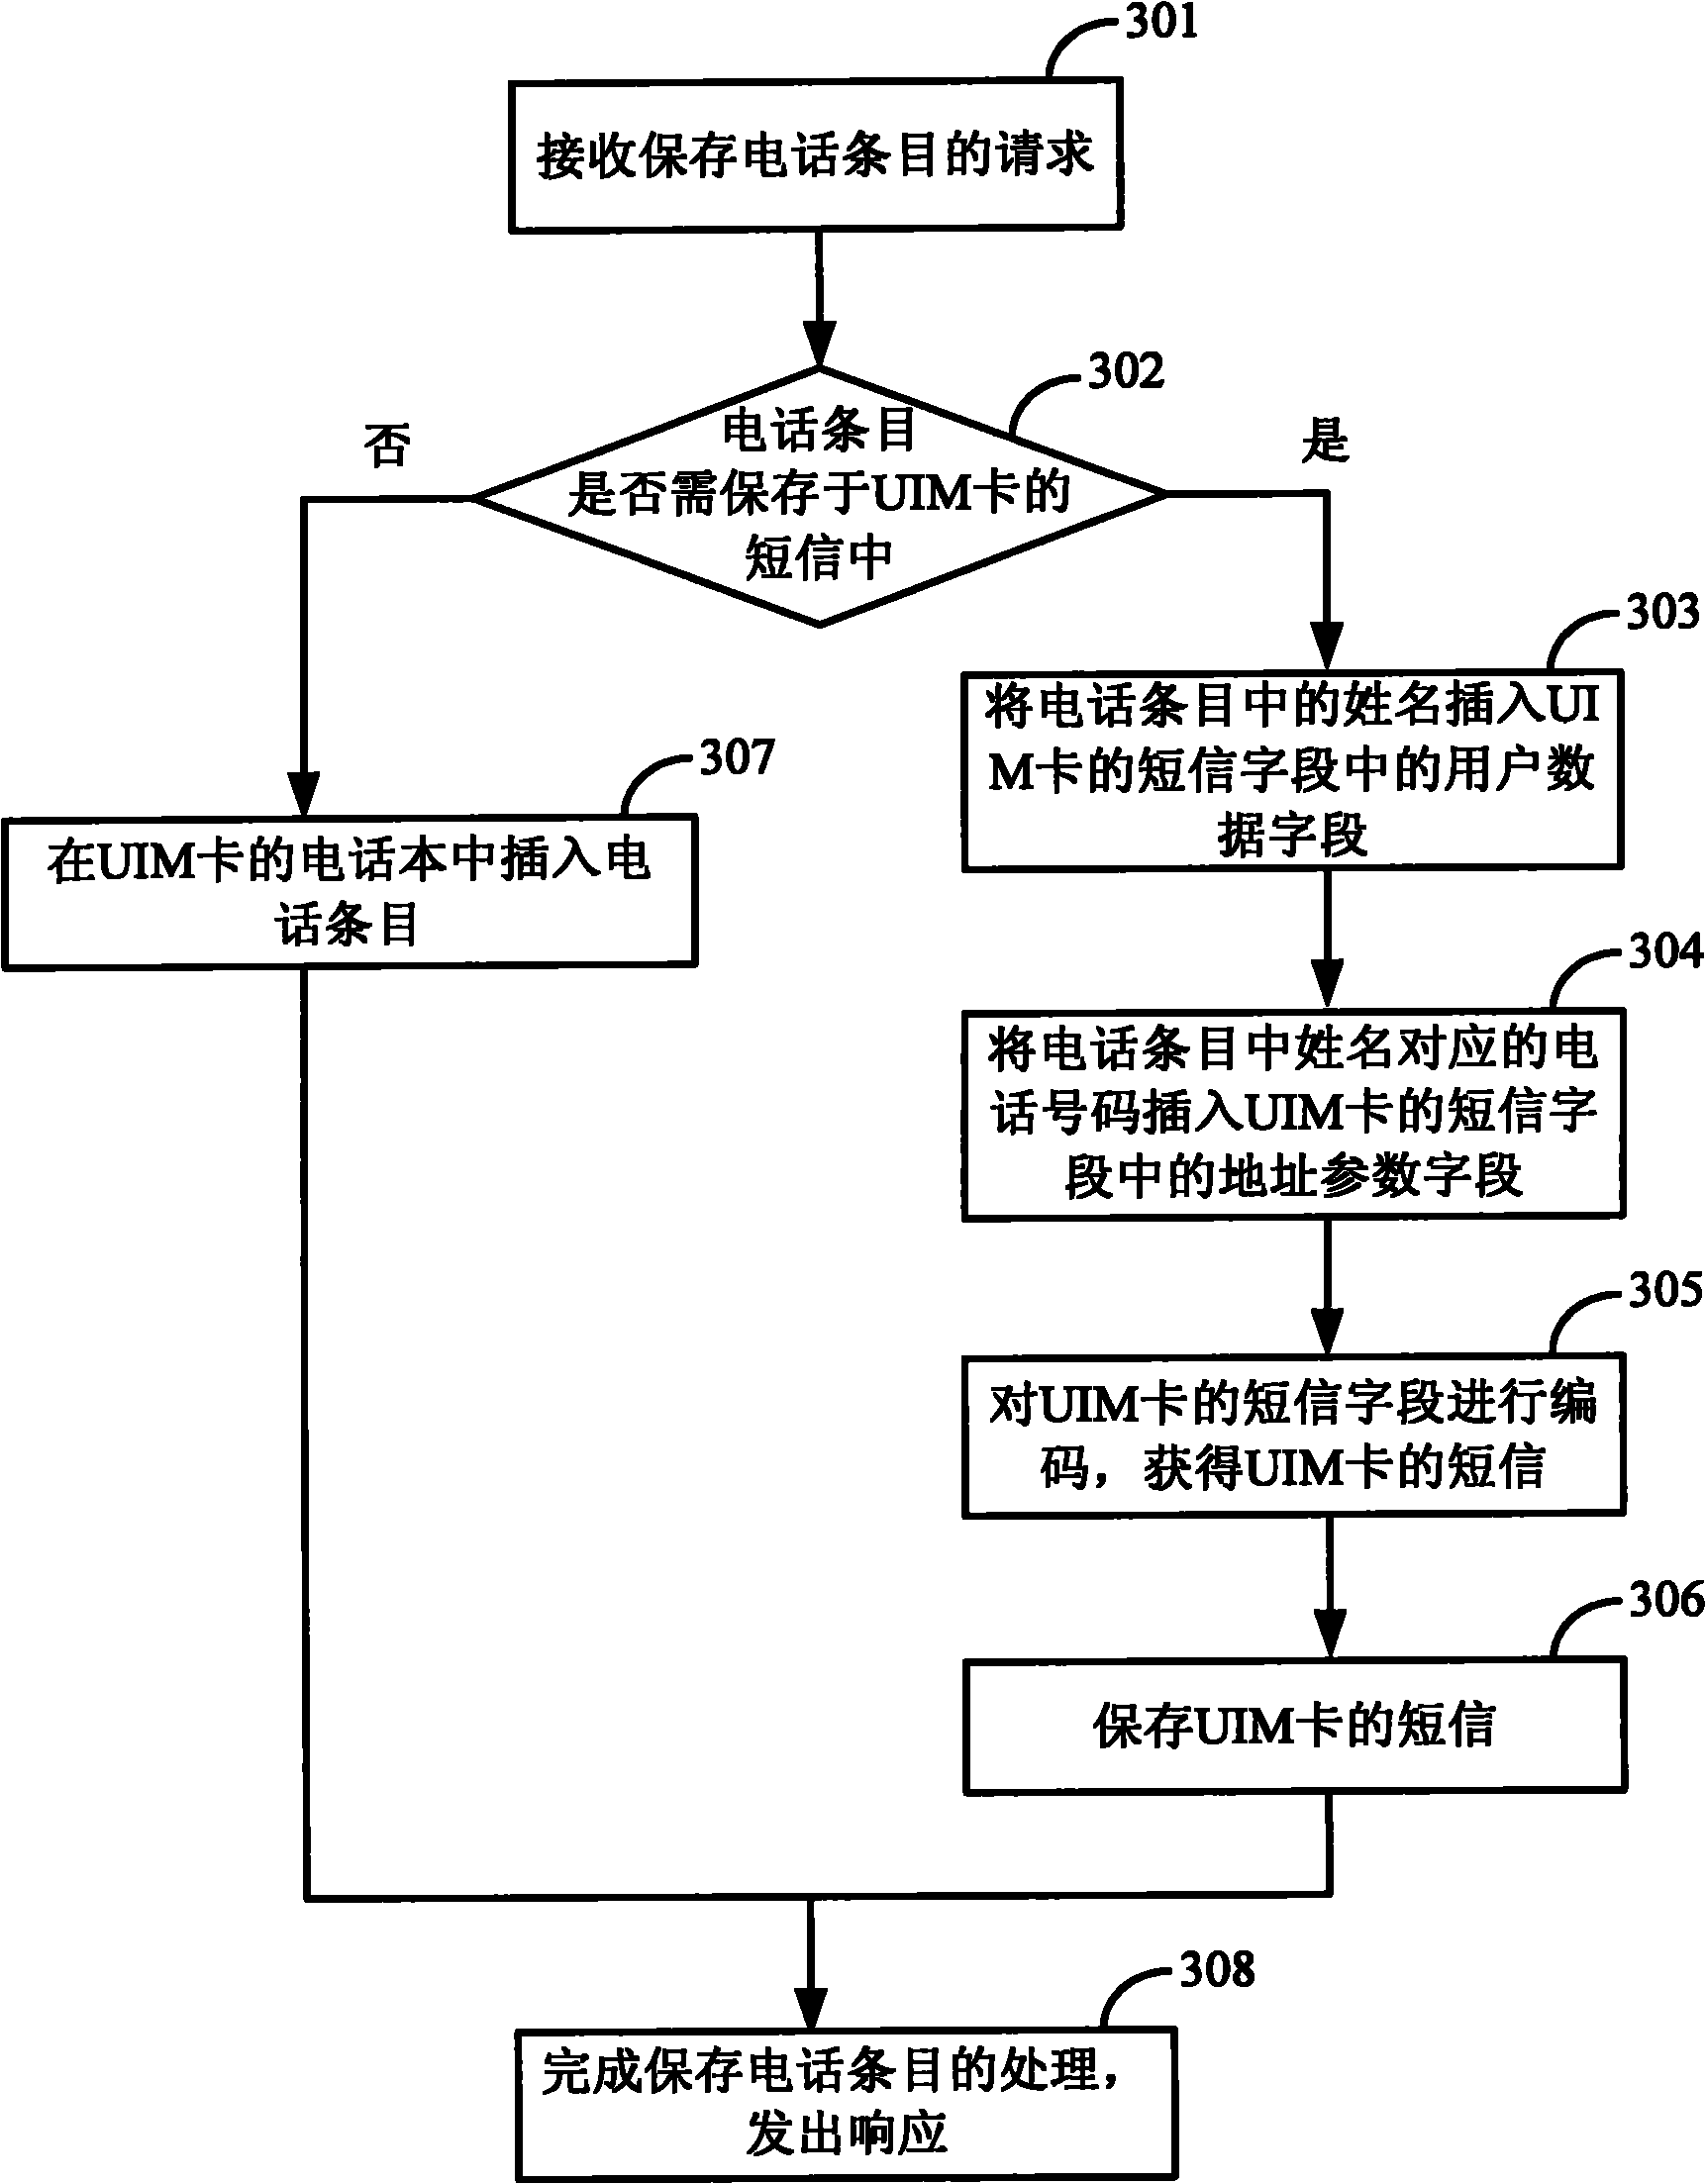 Processing method and equipment for user identity module (UIM) card phone book